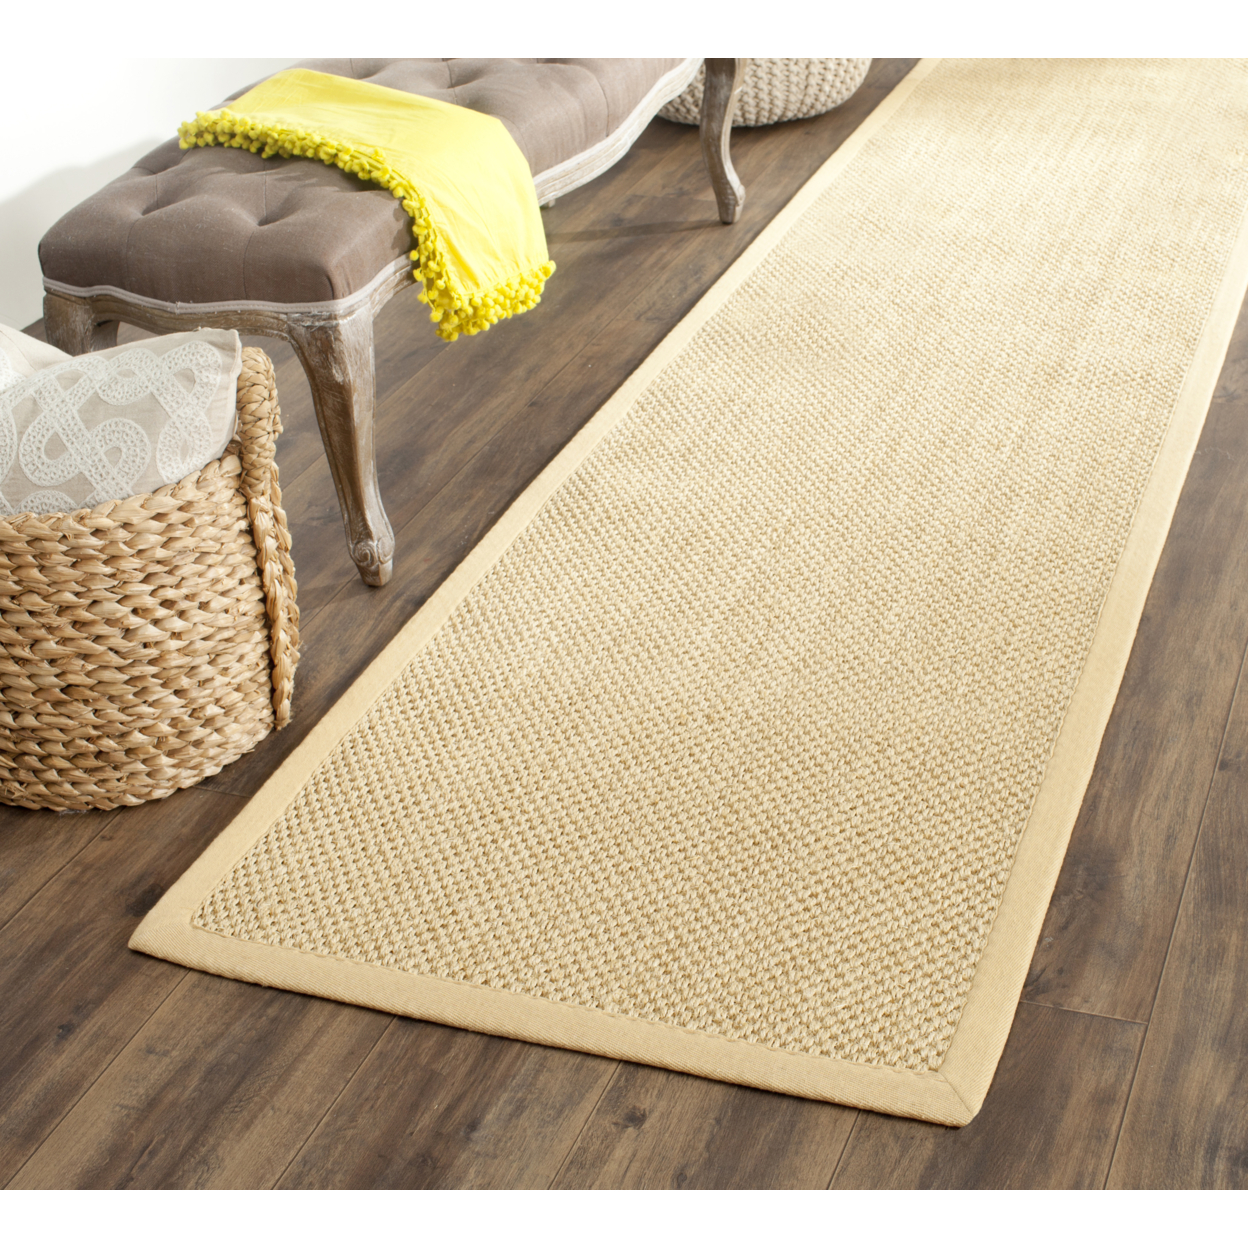 SAFAVIEH Natural Fiber Collection NF443A Maize/Wheat Rug - 4' Square